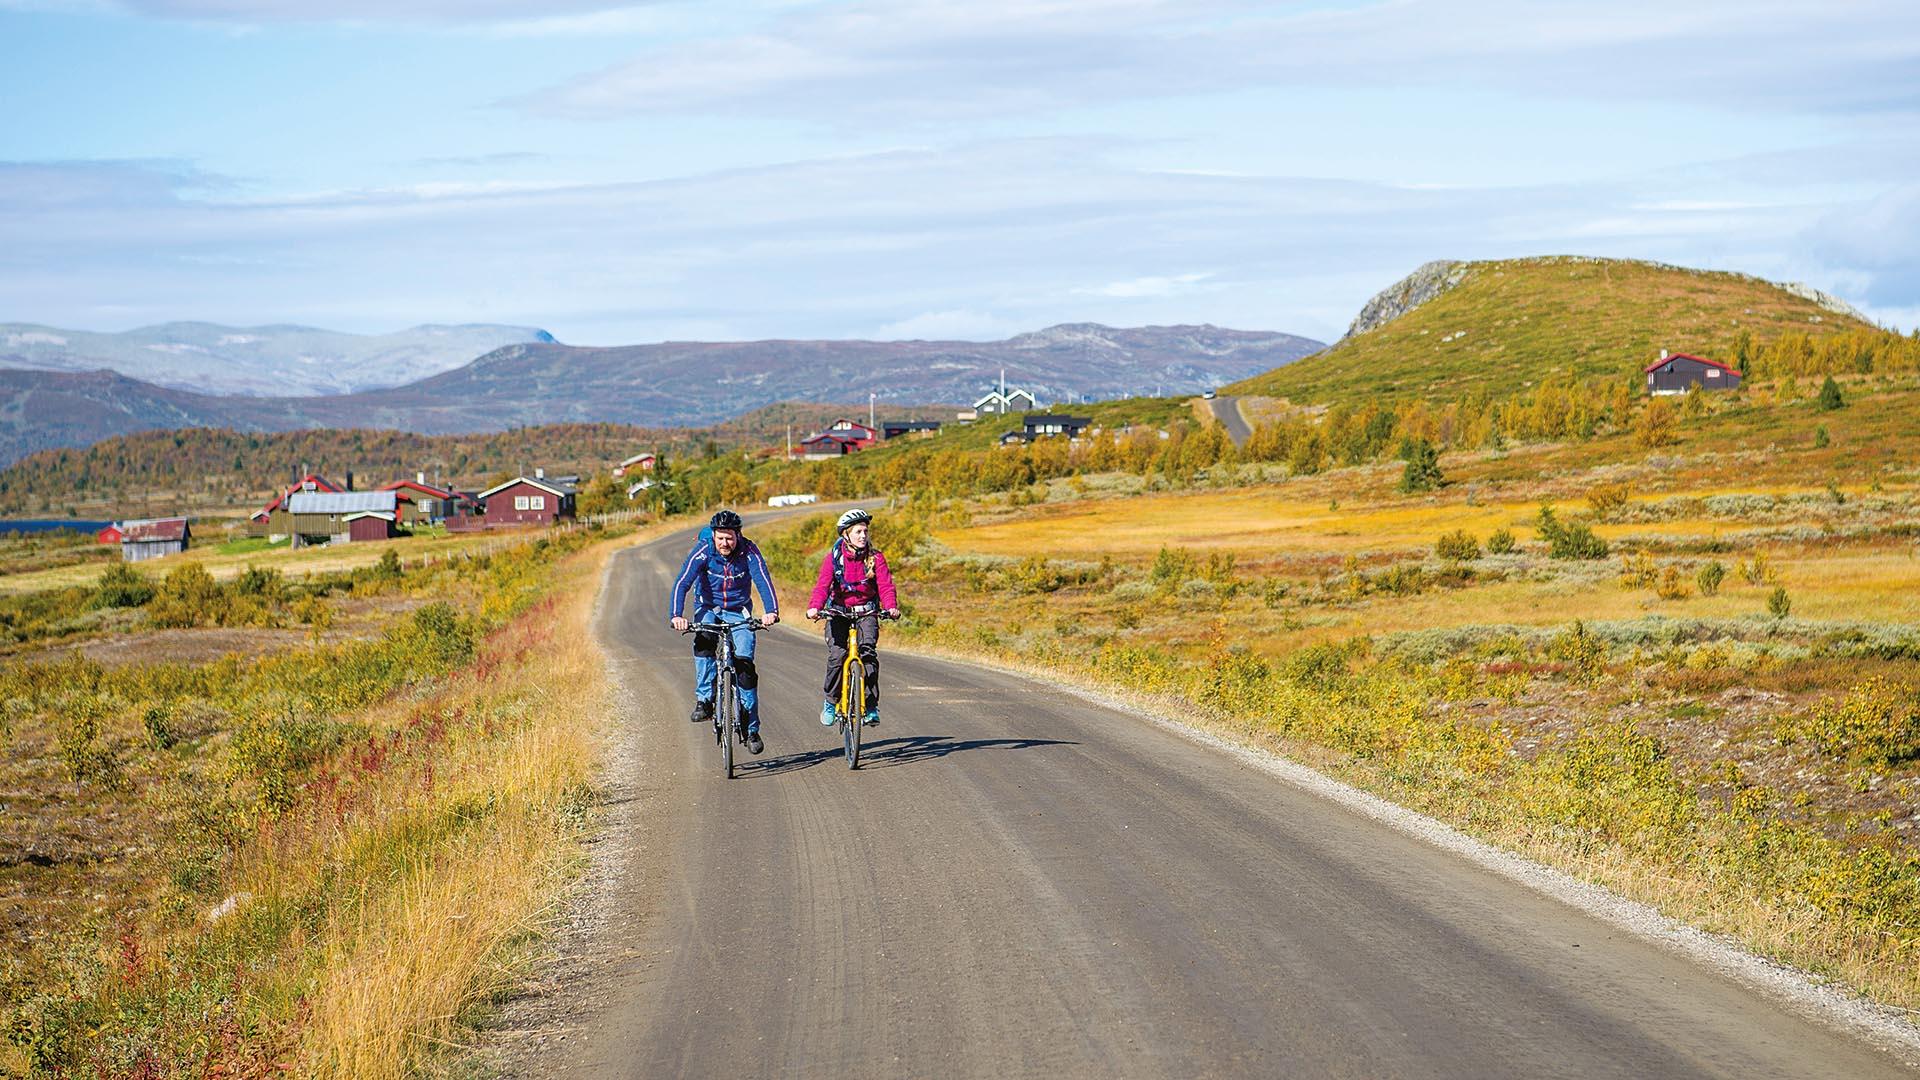 Two cyclists on a farm road over a high plateau during autumn.